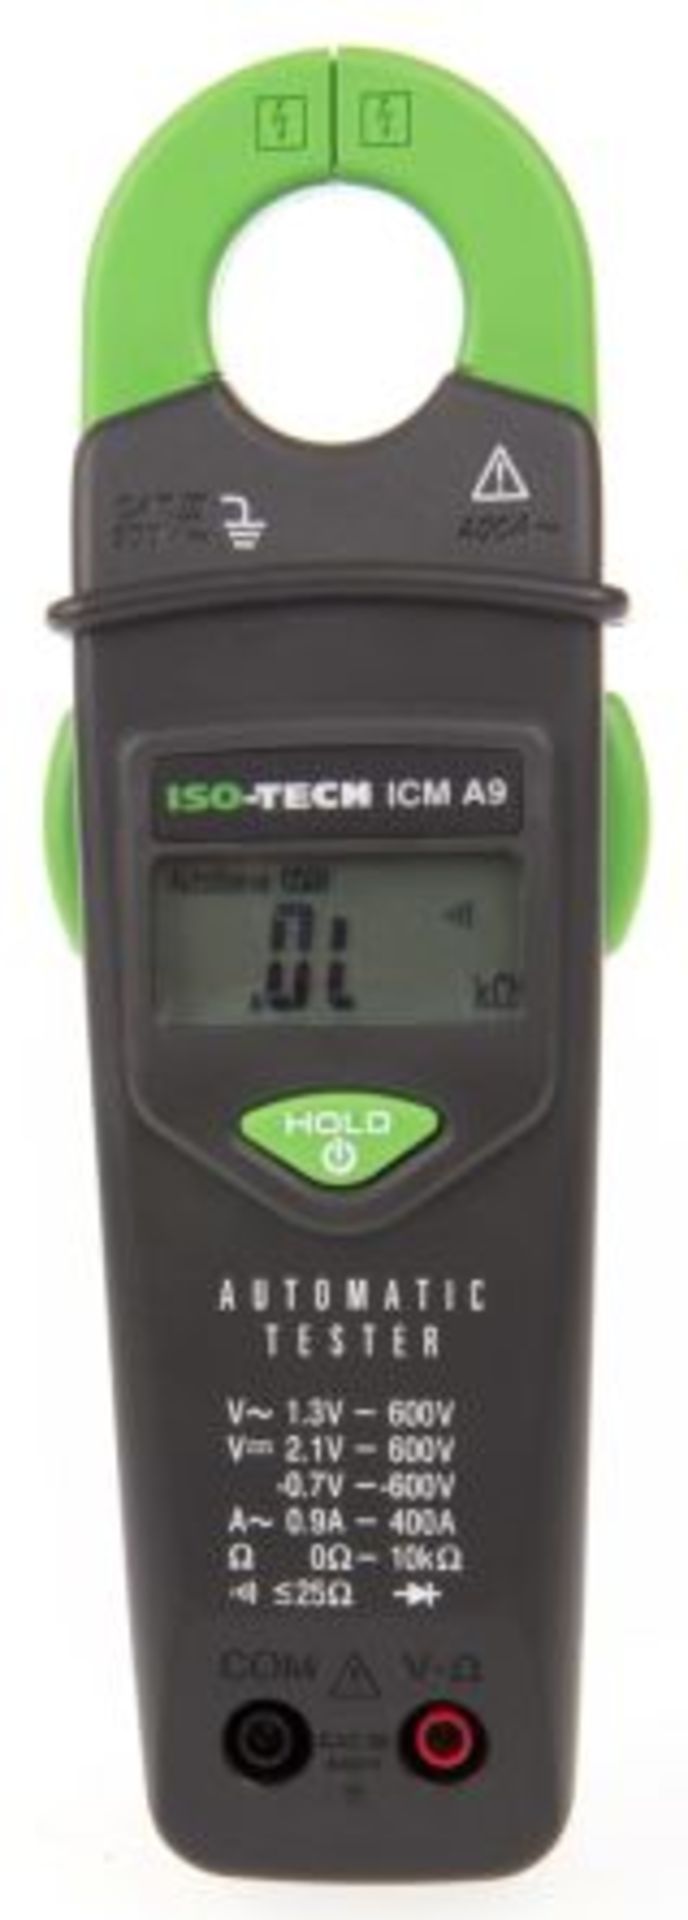 ISO-TECH ICMA9 Clamp Meter, Max Current 600A ac CAT II 1000 V, CAT III 600 V - Image 2 of 3